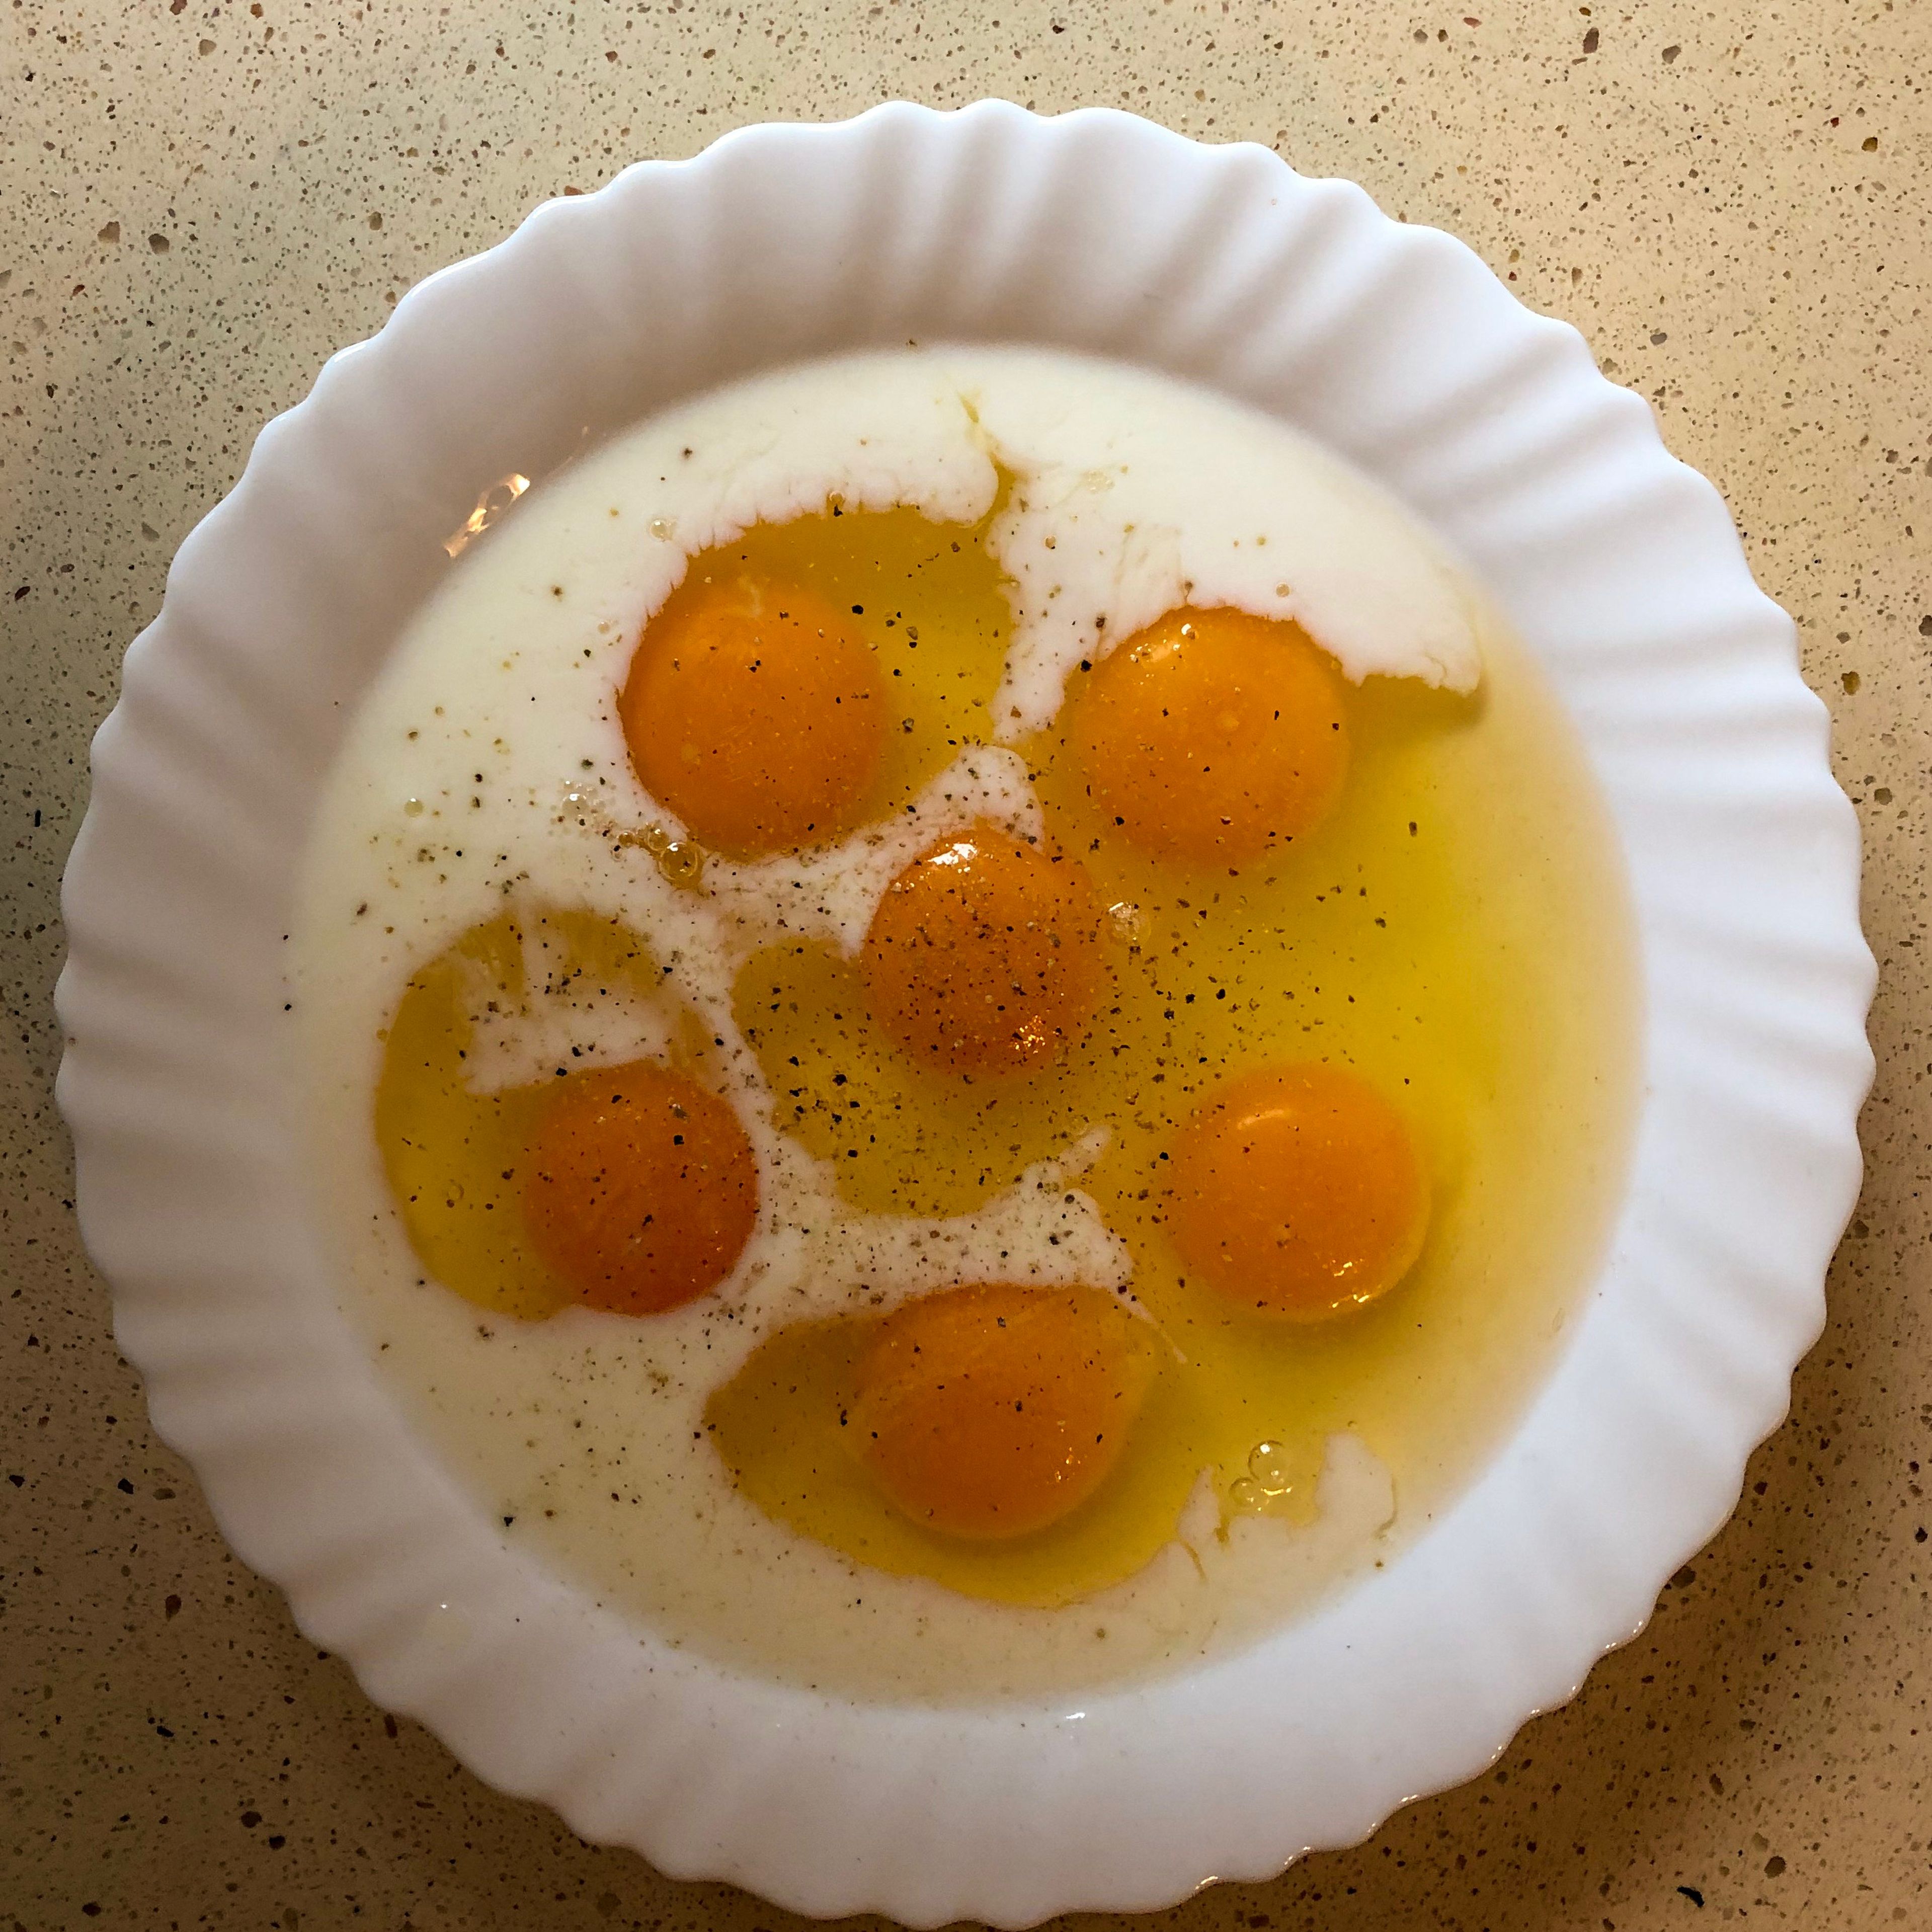 Grab a bowl, crack open your eggs and add the egg white and yolks into the bowl. Add milk, salt and pepper for seasoning. Whisk until all mixed.